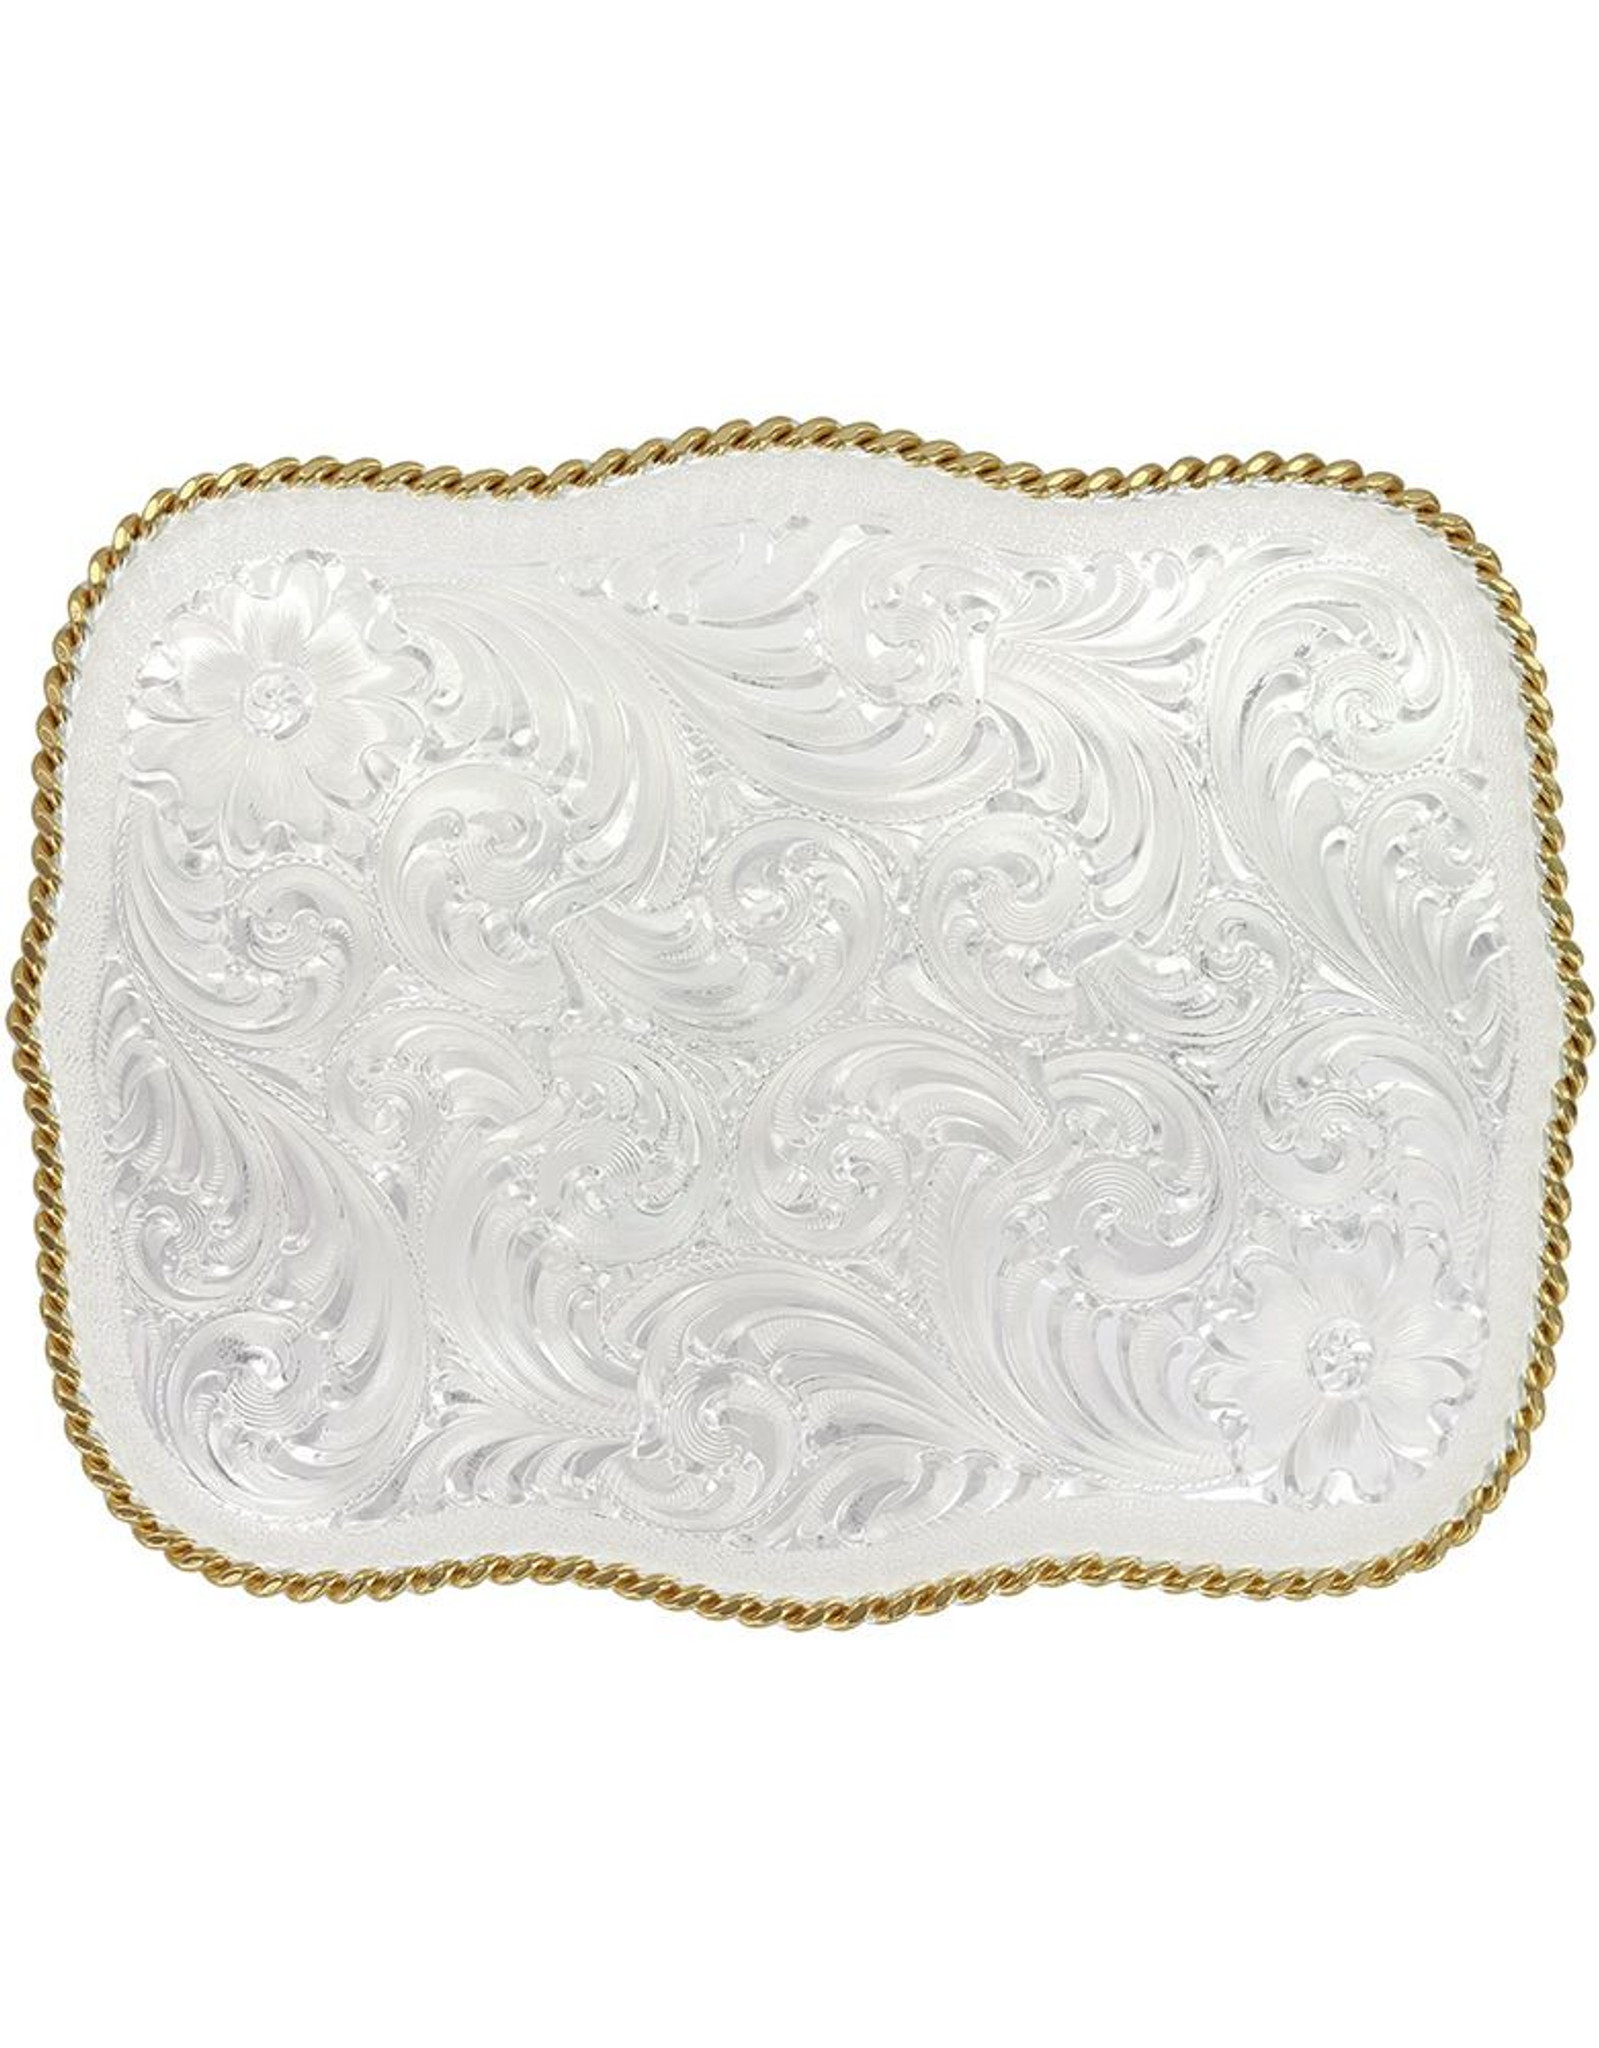 Montana Silversmiths Floral Engraved Buckle Silver/Gold